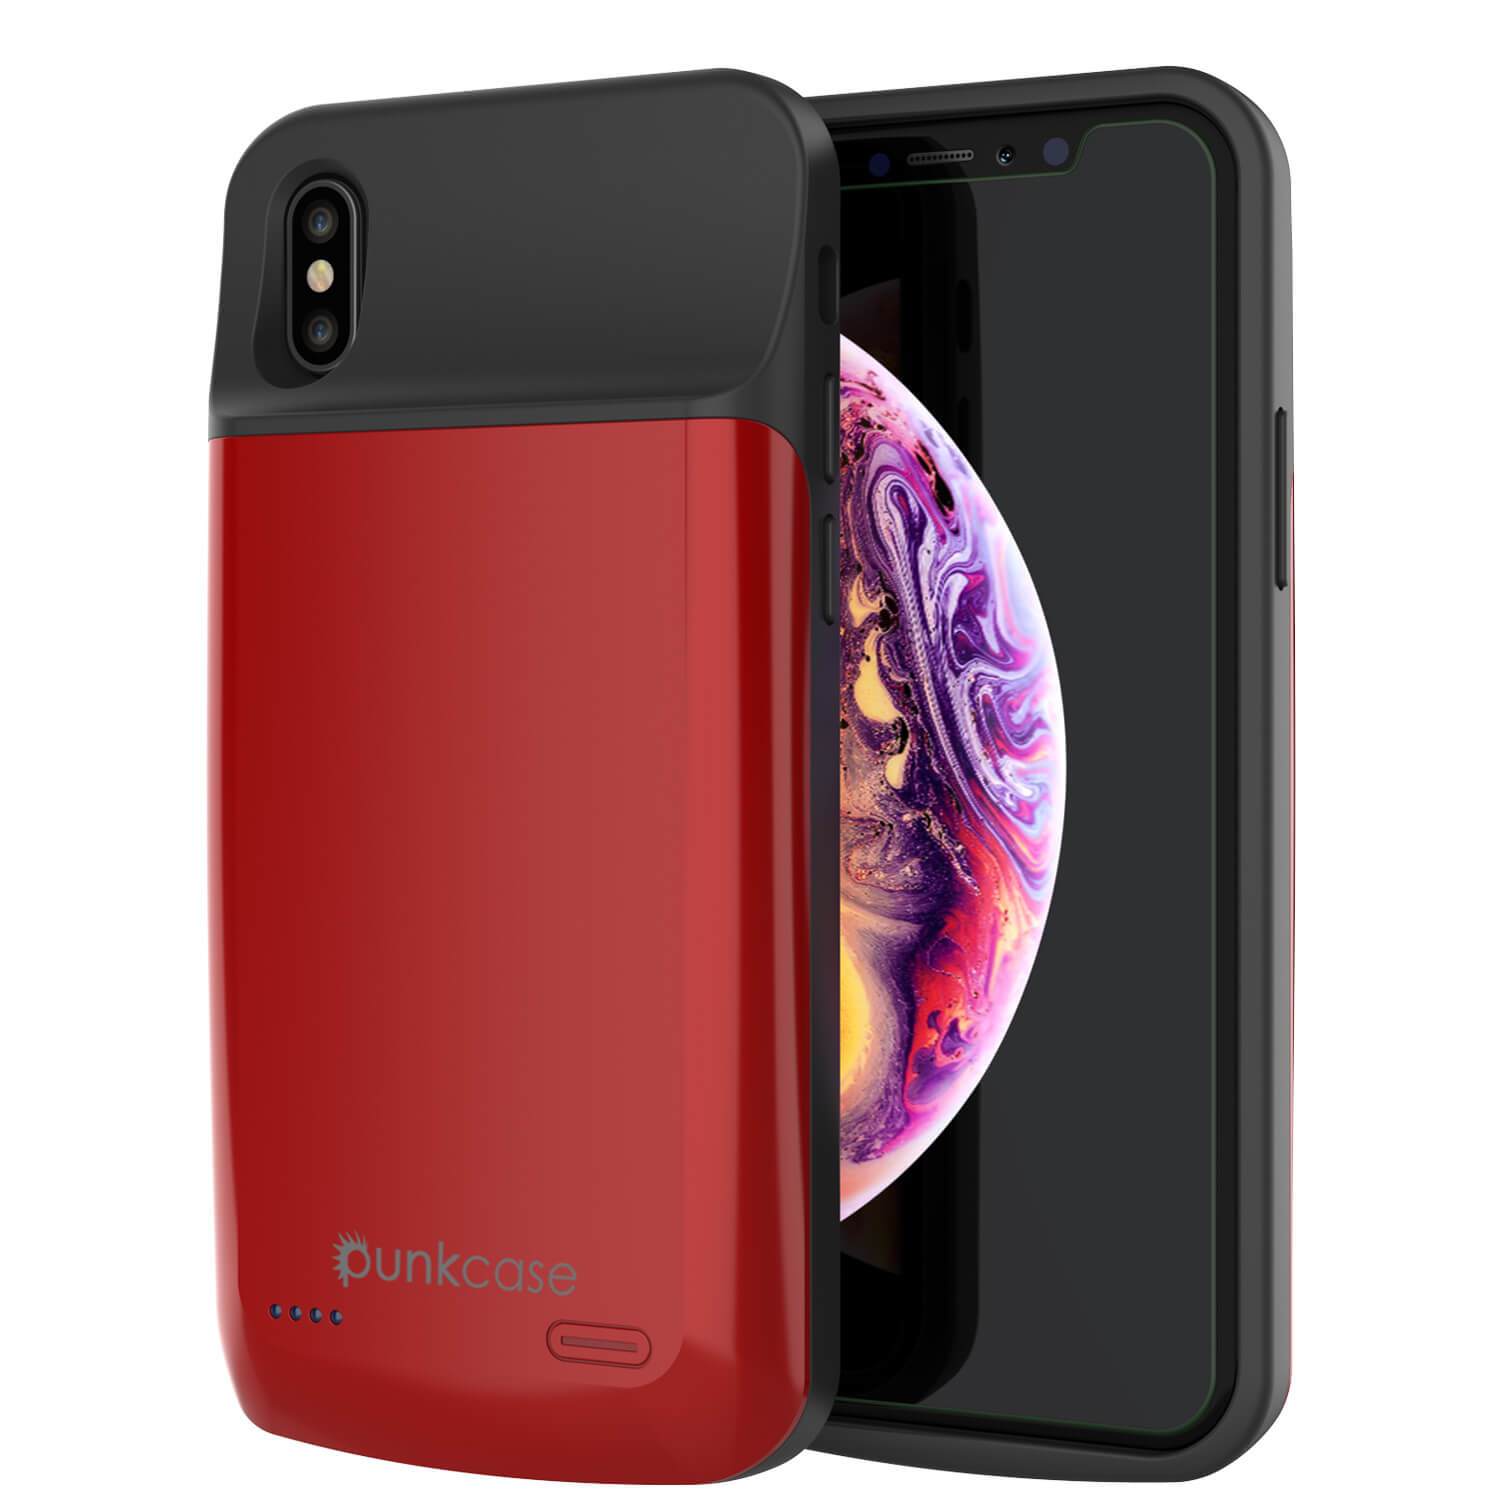 iphone XS Max Battery Case, PunkJuice 5000mAH Fast Charging Power Bank W/ Screen Protector | [Red]